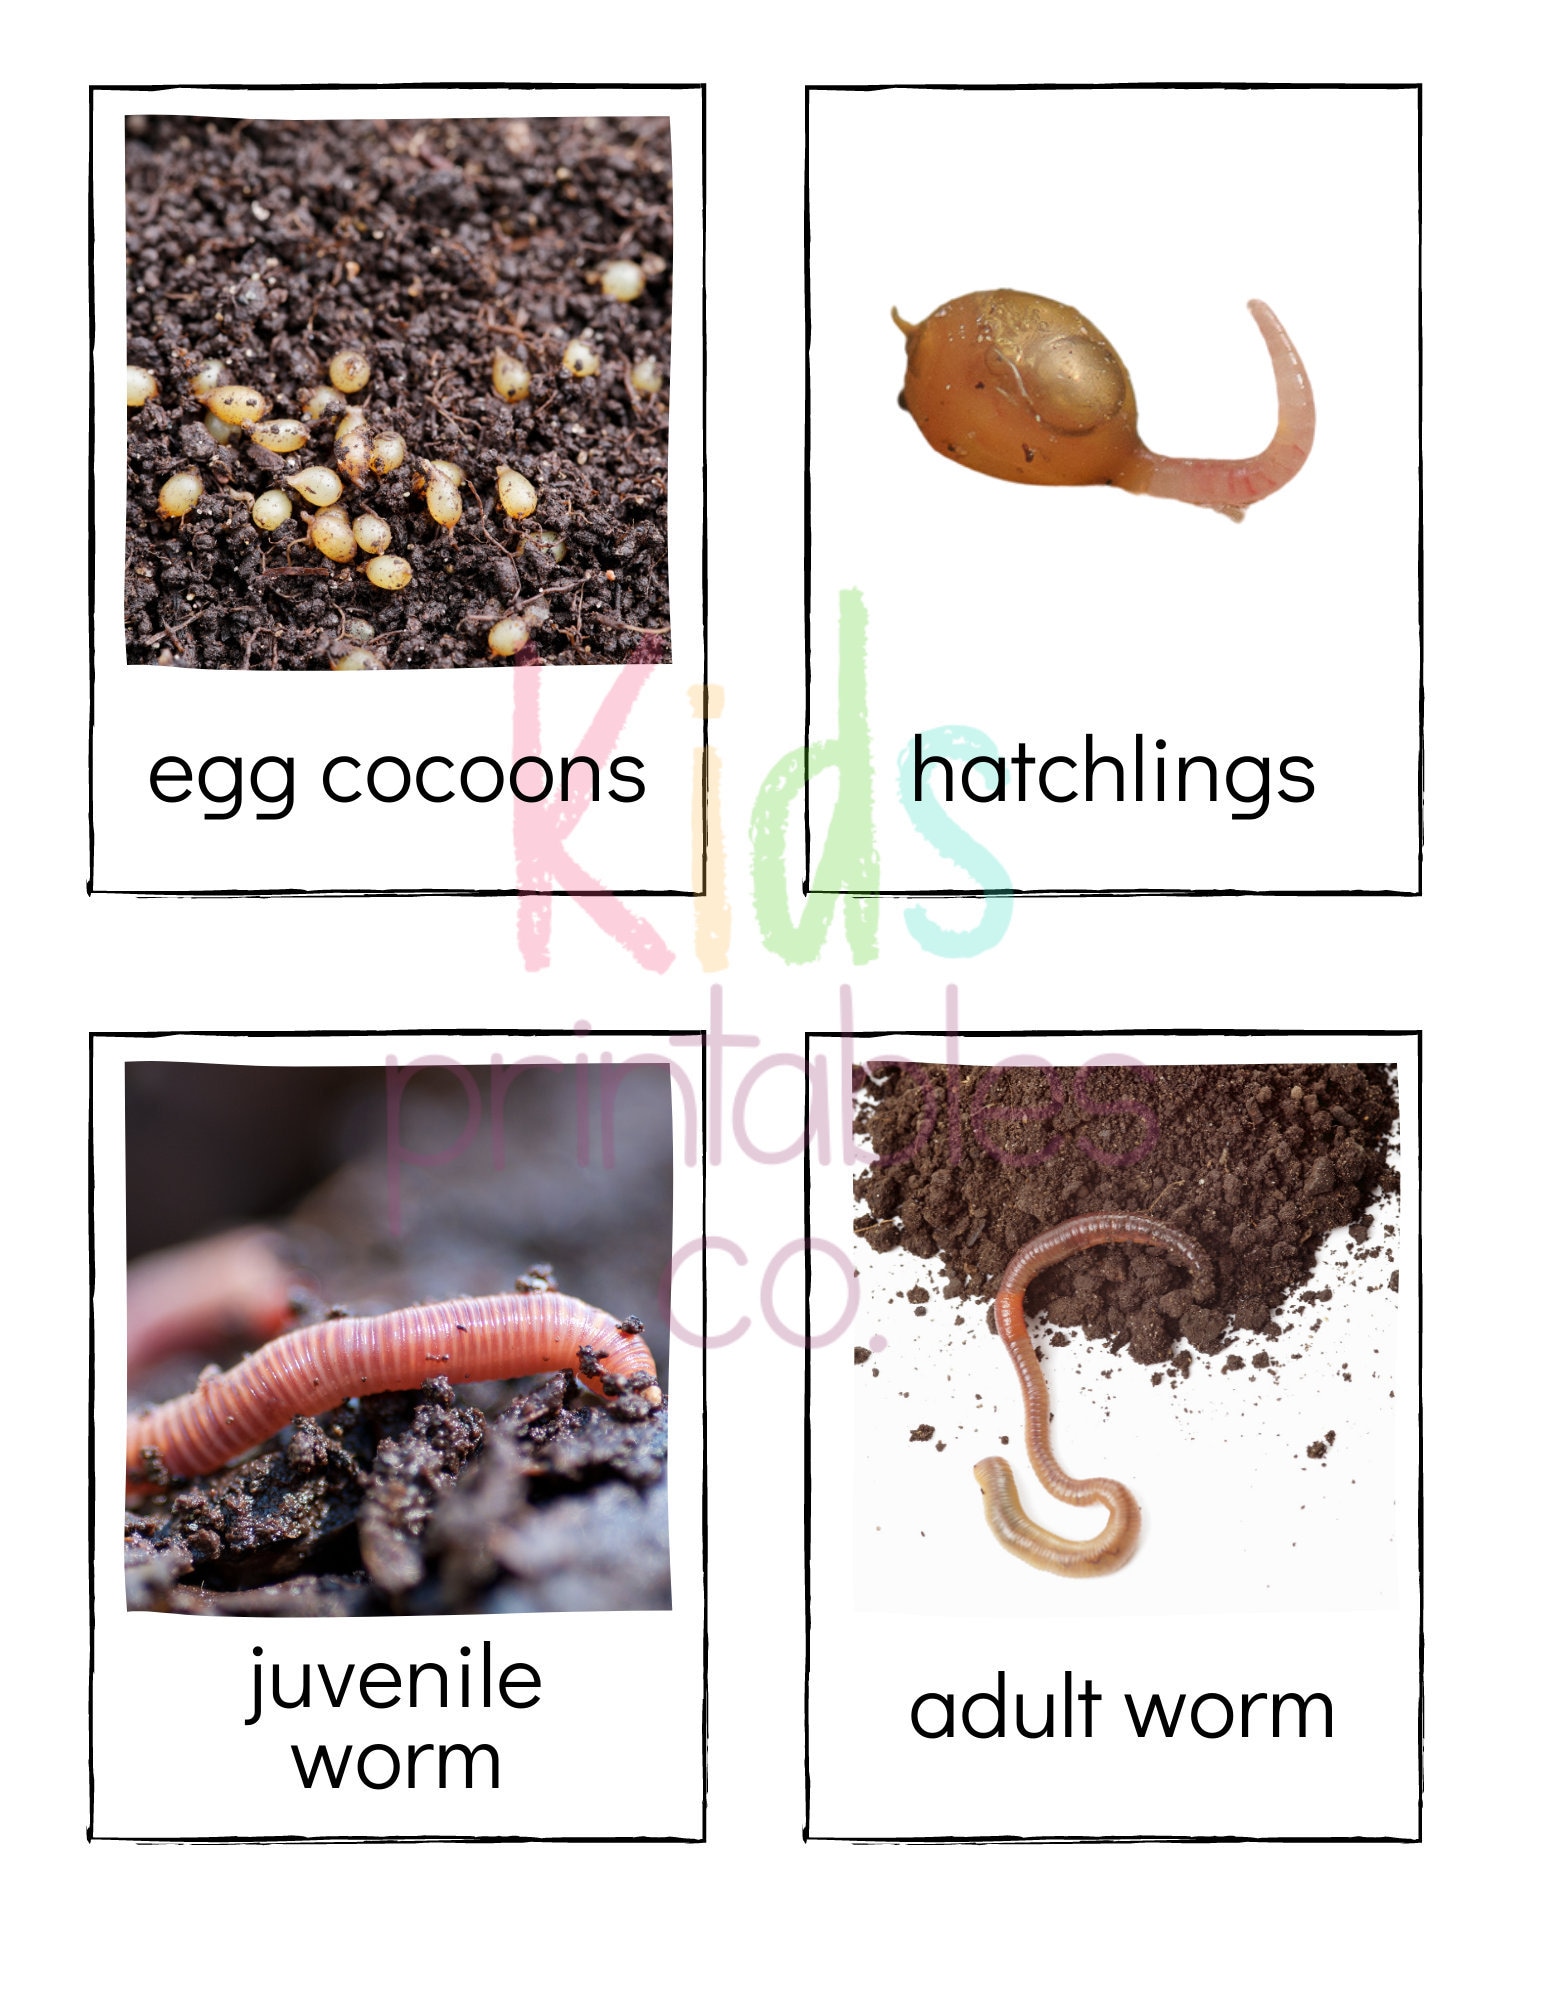 Earthworm Life Cycle - Identification Cards